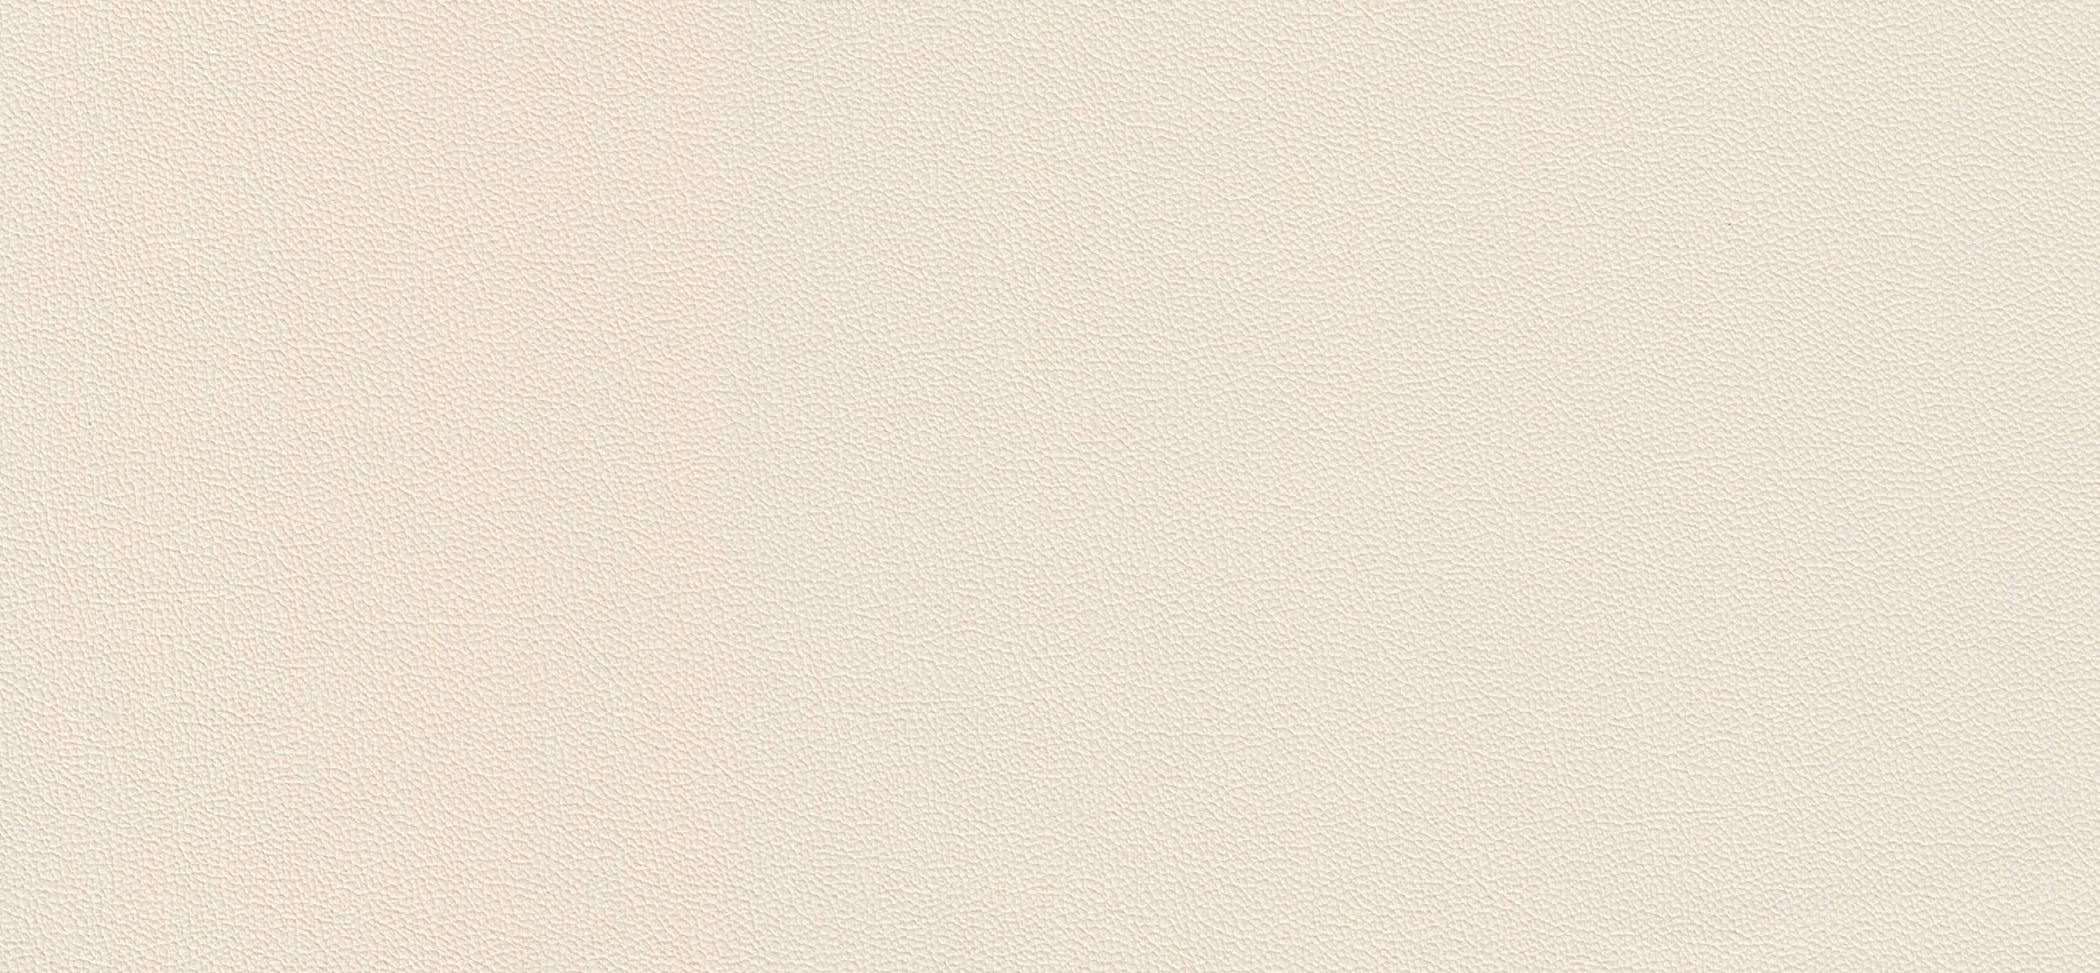 Cleanness beige